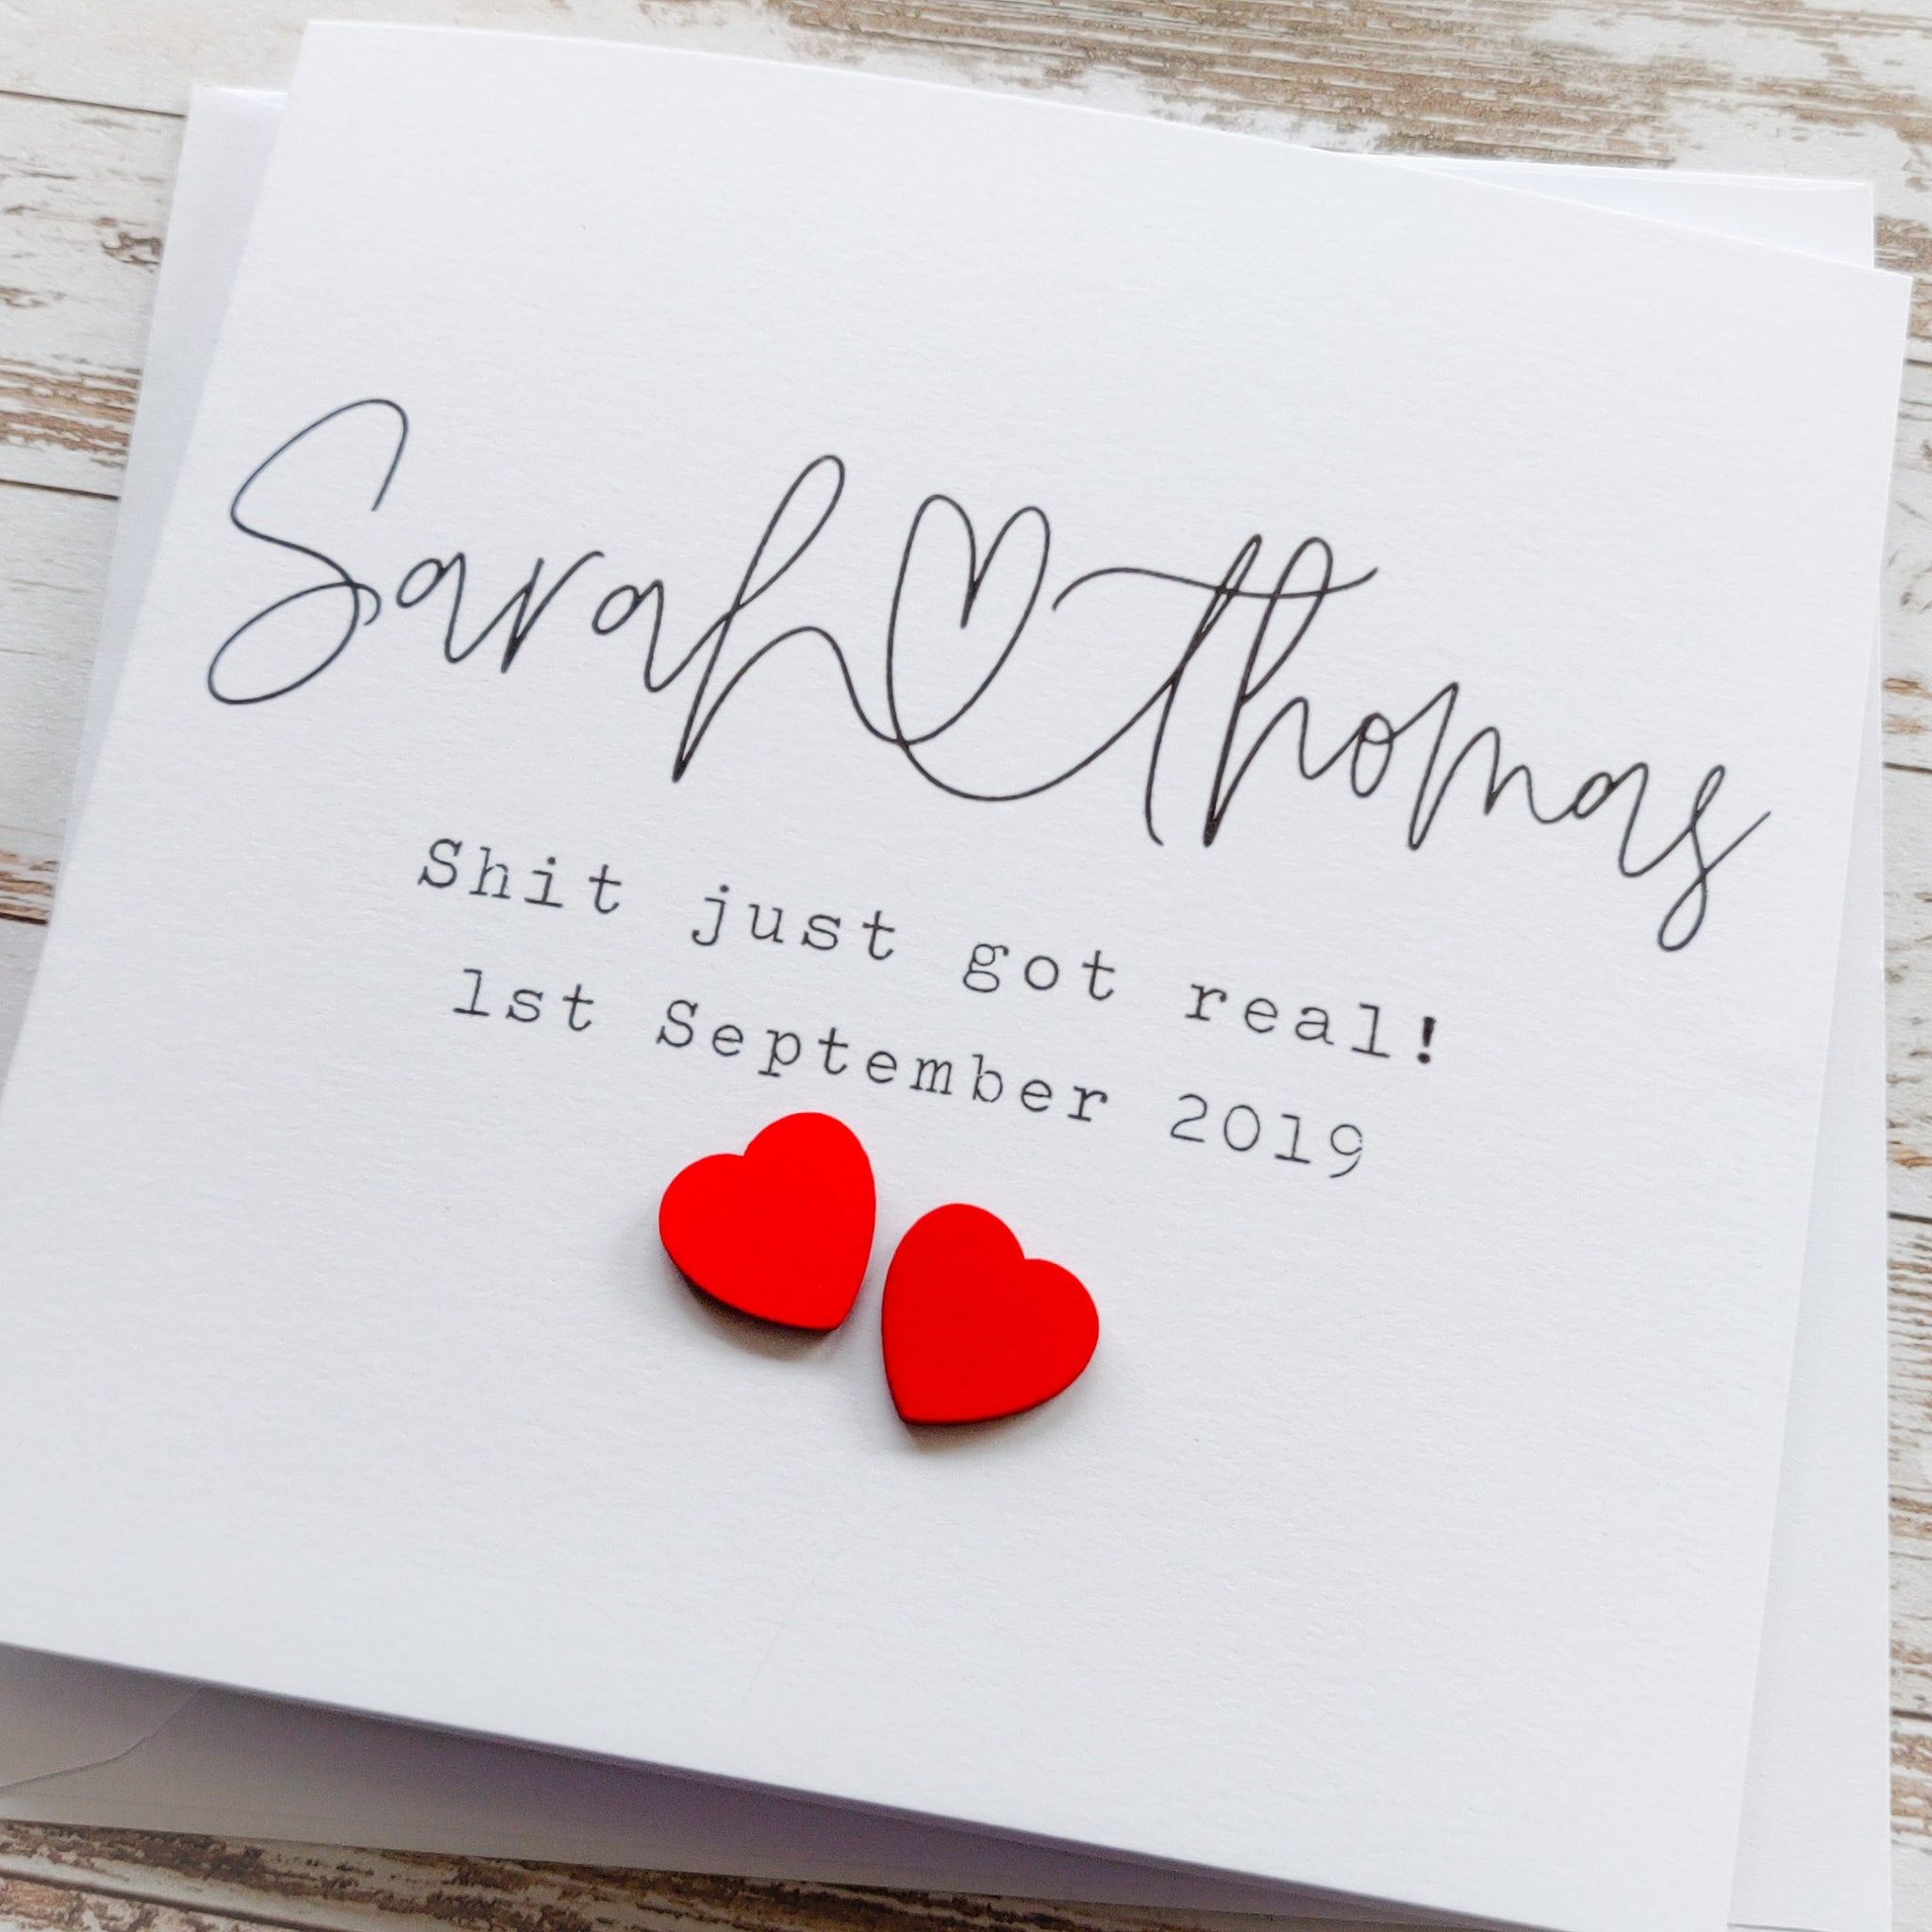 Personalised "Shit just got real!" wedding engagement card